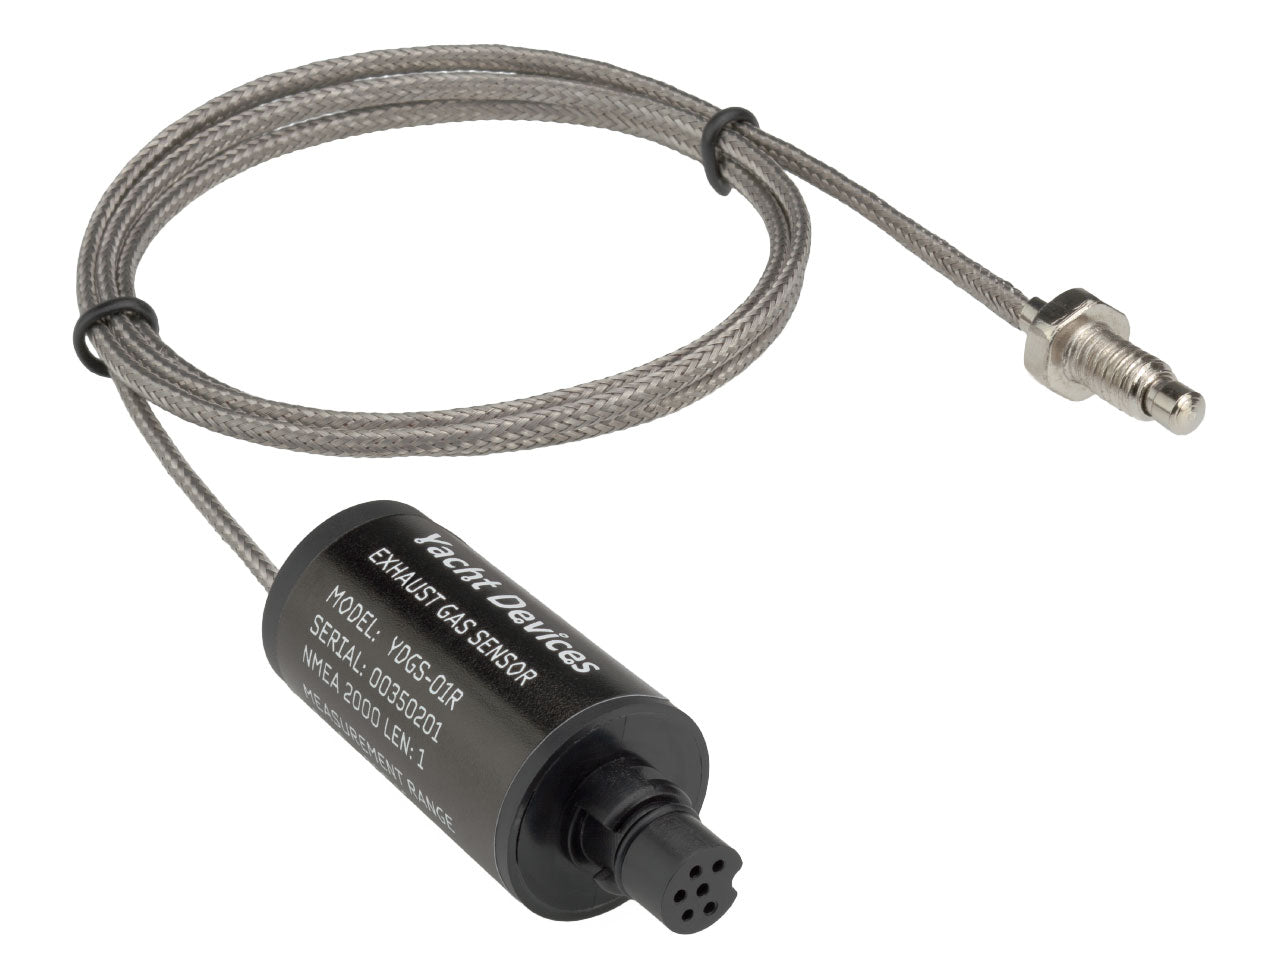 Exhaust Gas Sensor - YDGS-01N and YDGS-01R - 2 Dogs Marine